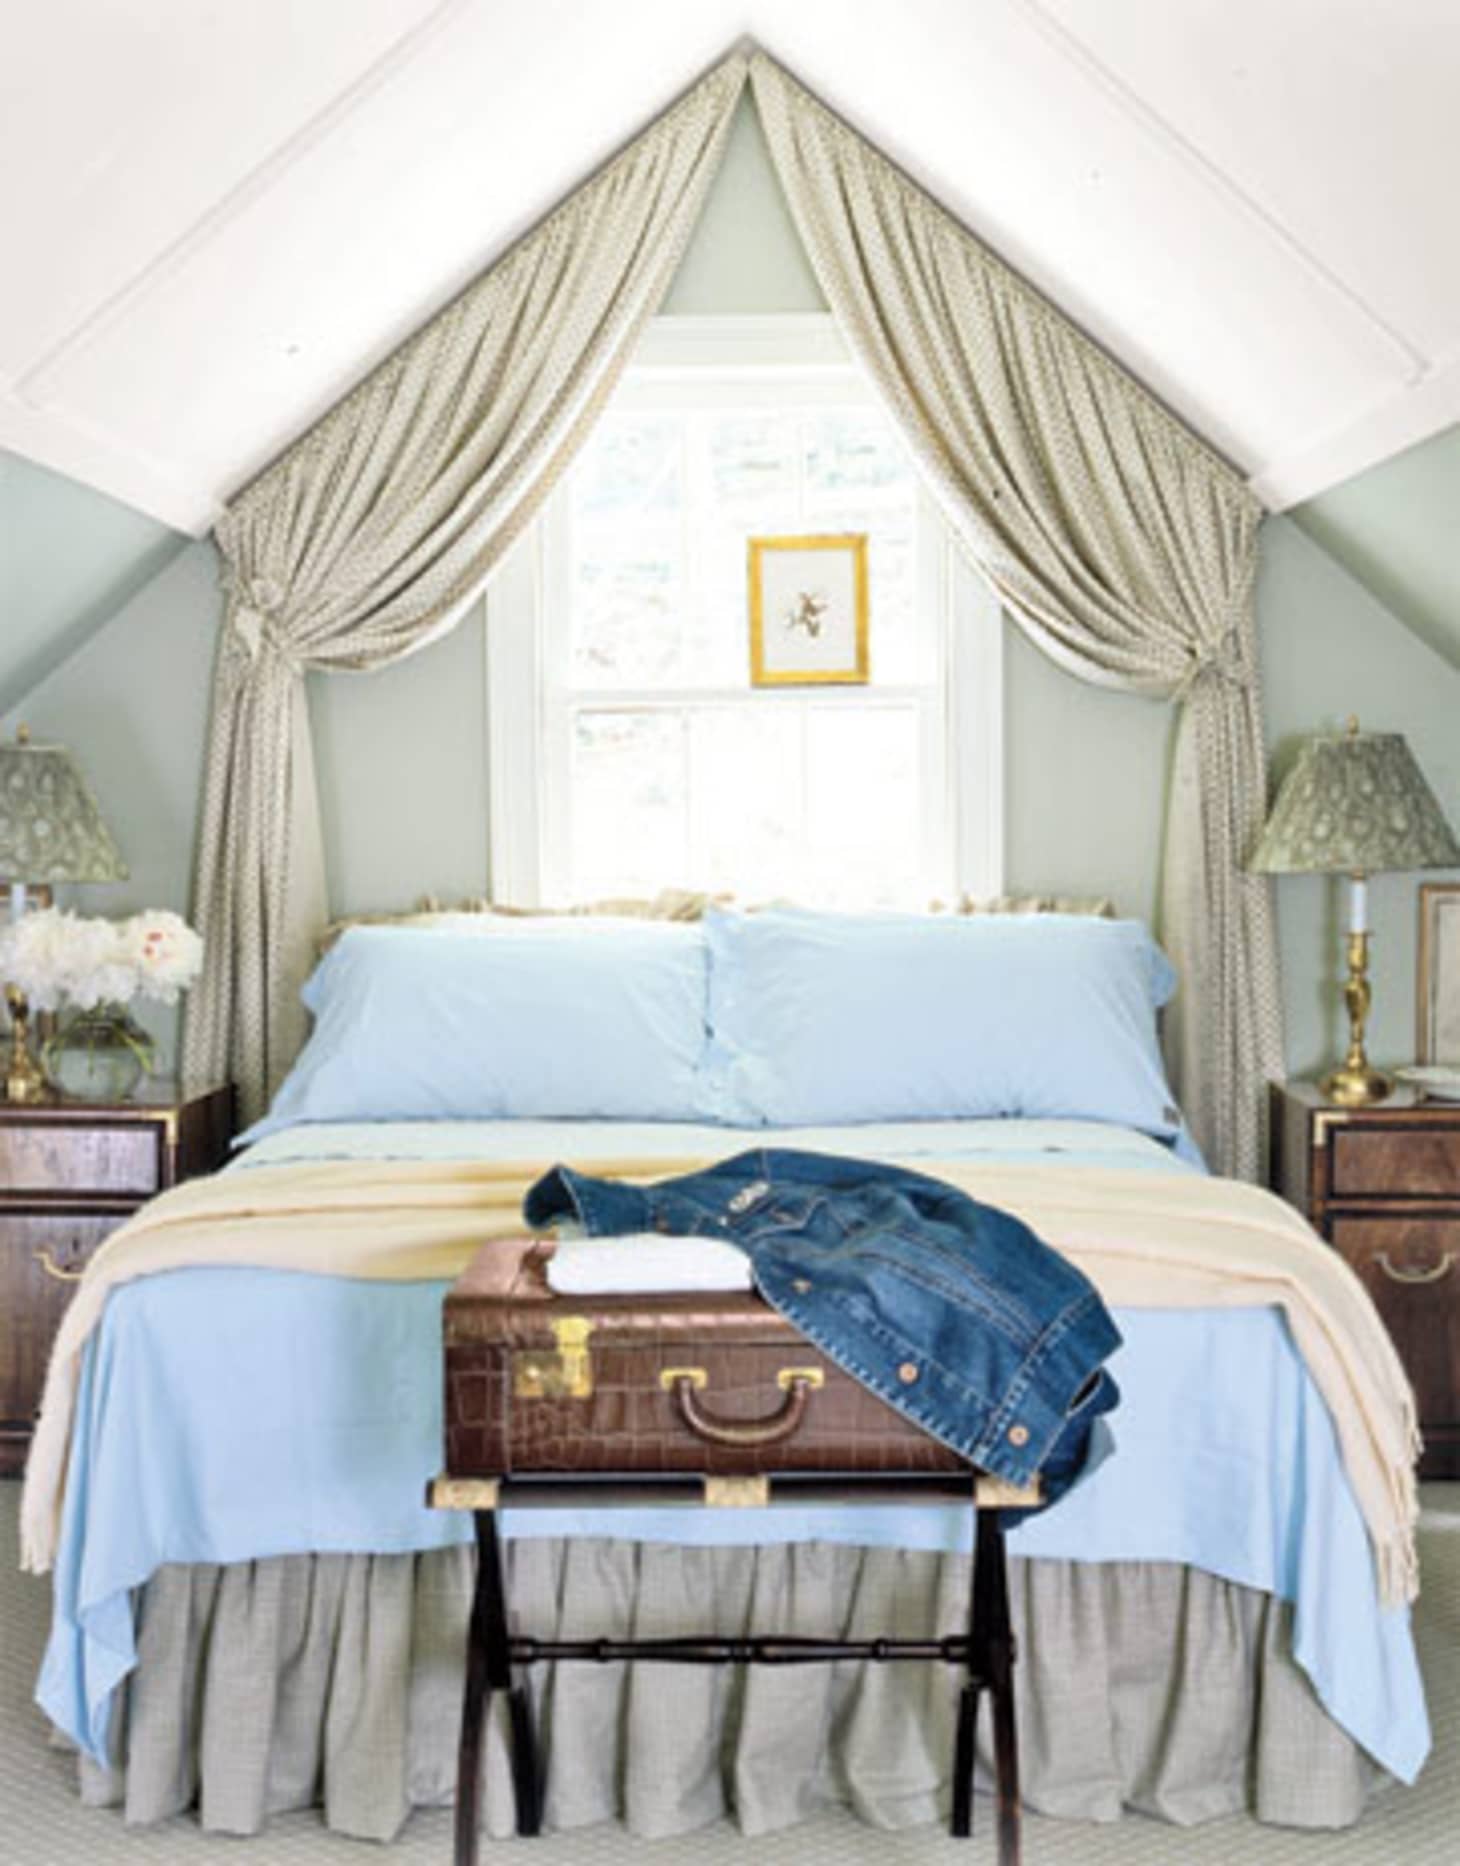 DIY Ideas for Getting the Look of a Canopy Bed Without ...